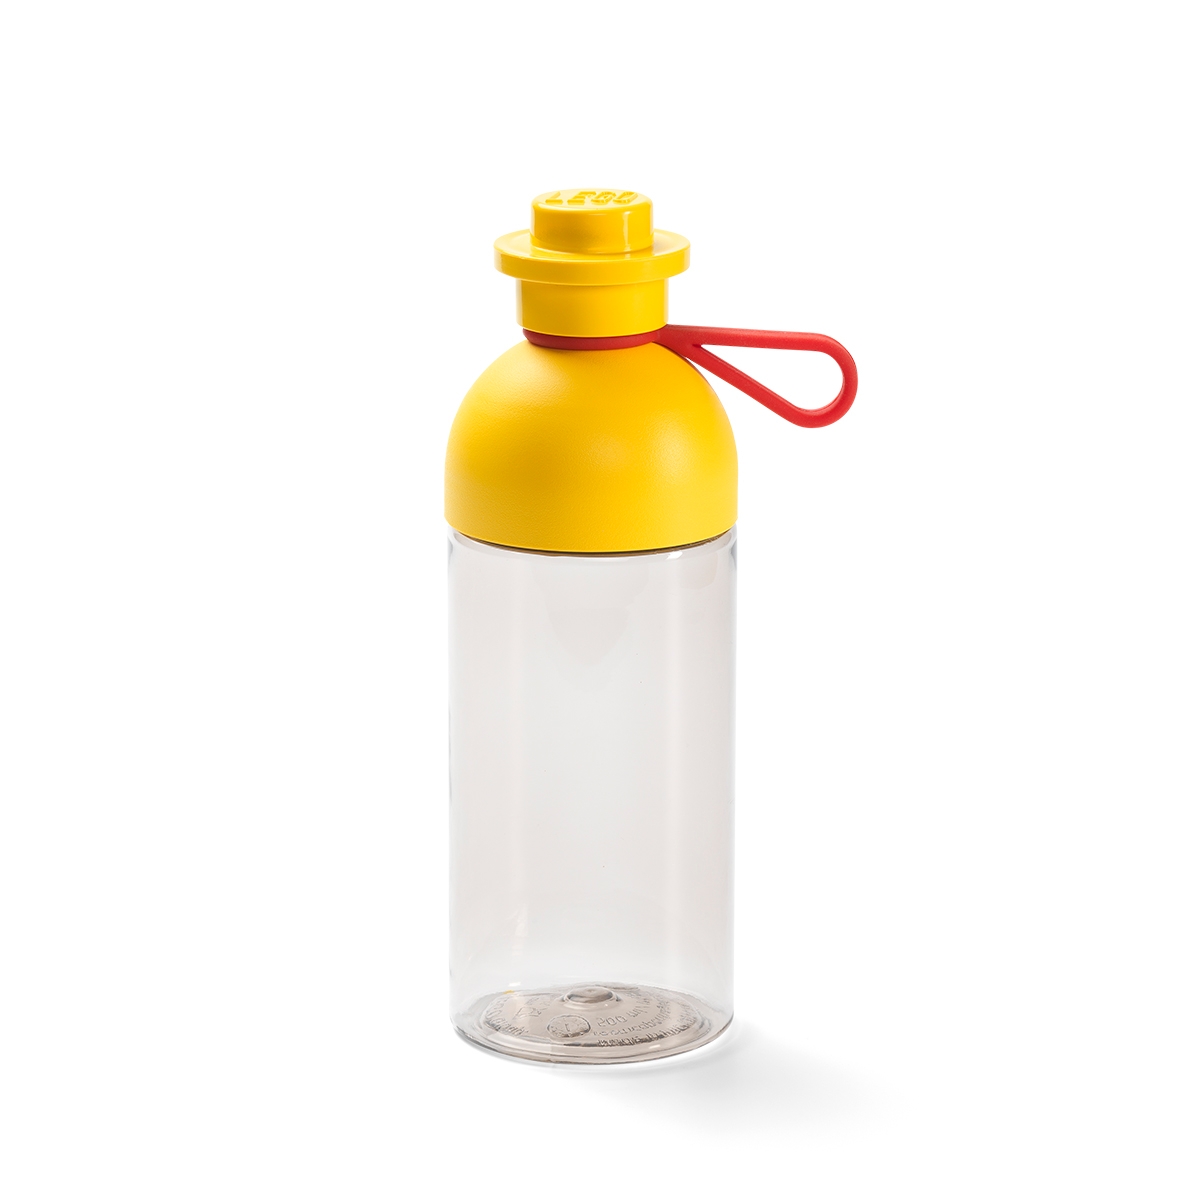 LEGO LUNCH DRINKS BOTTLE 4 DIFFERENT COLOURS LEGO HEAD 